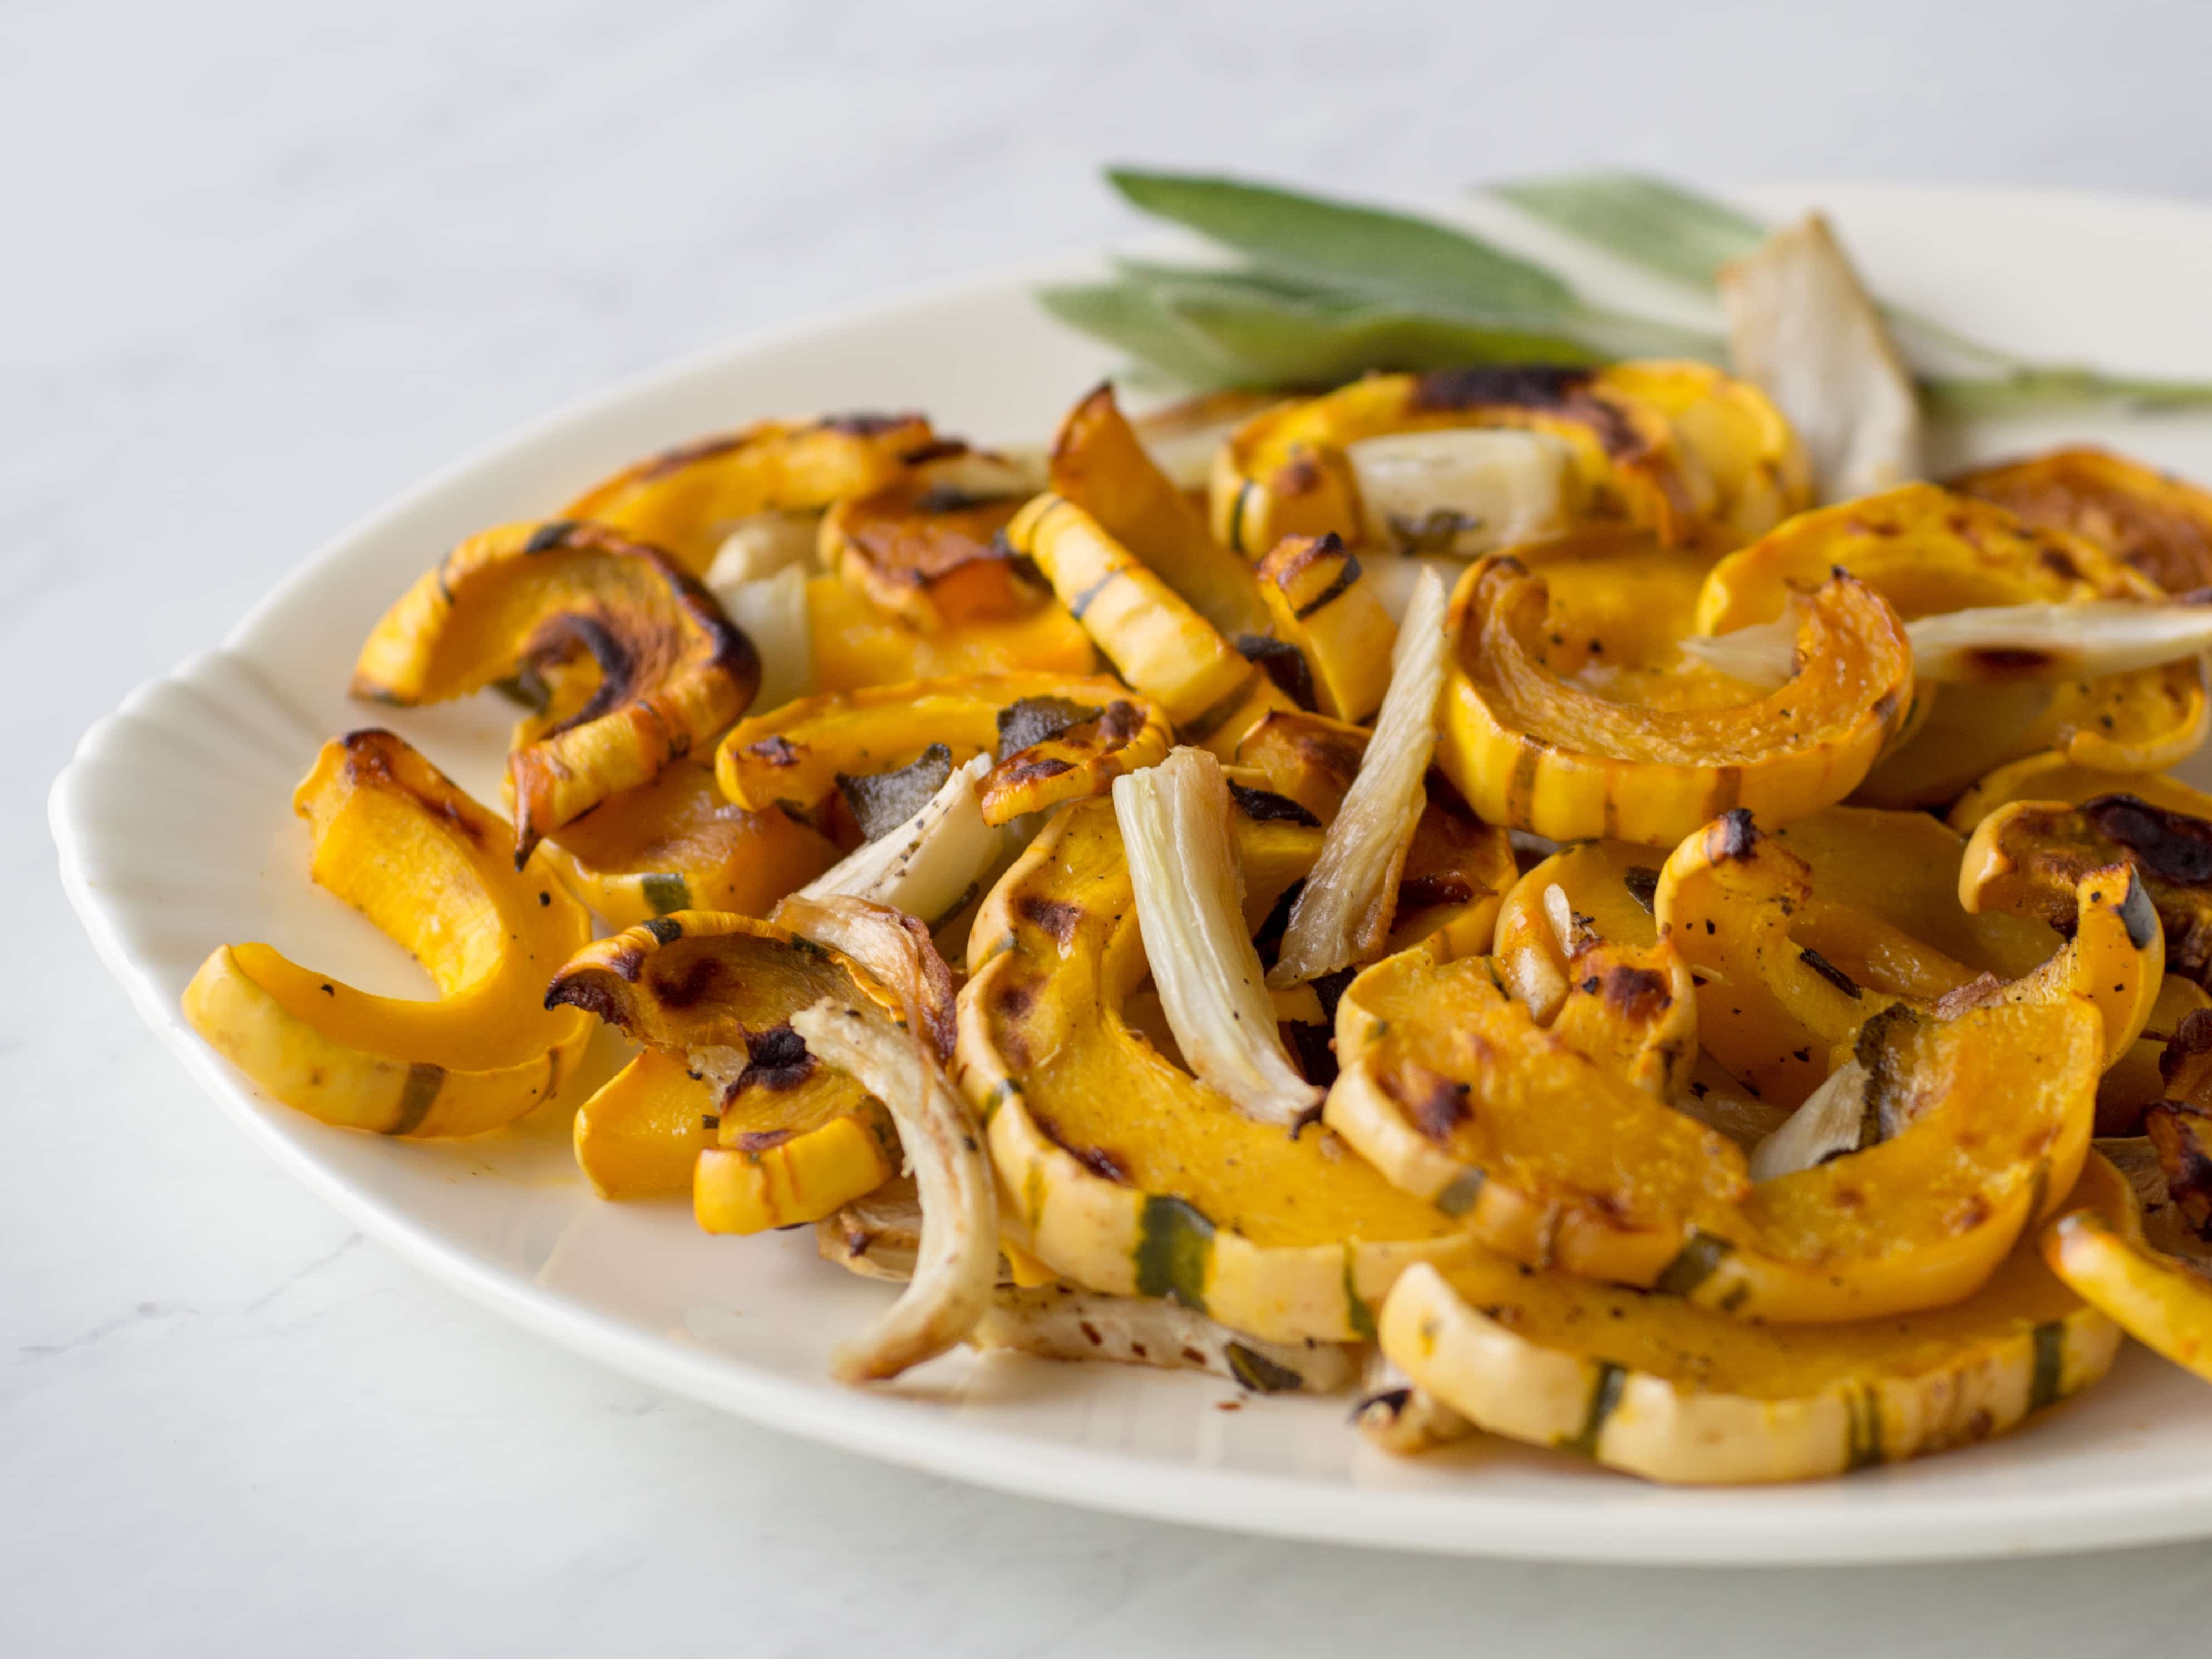 Roasted delicata squash with sage leaves on a white plate.